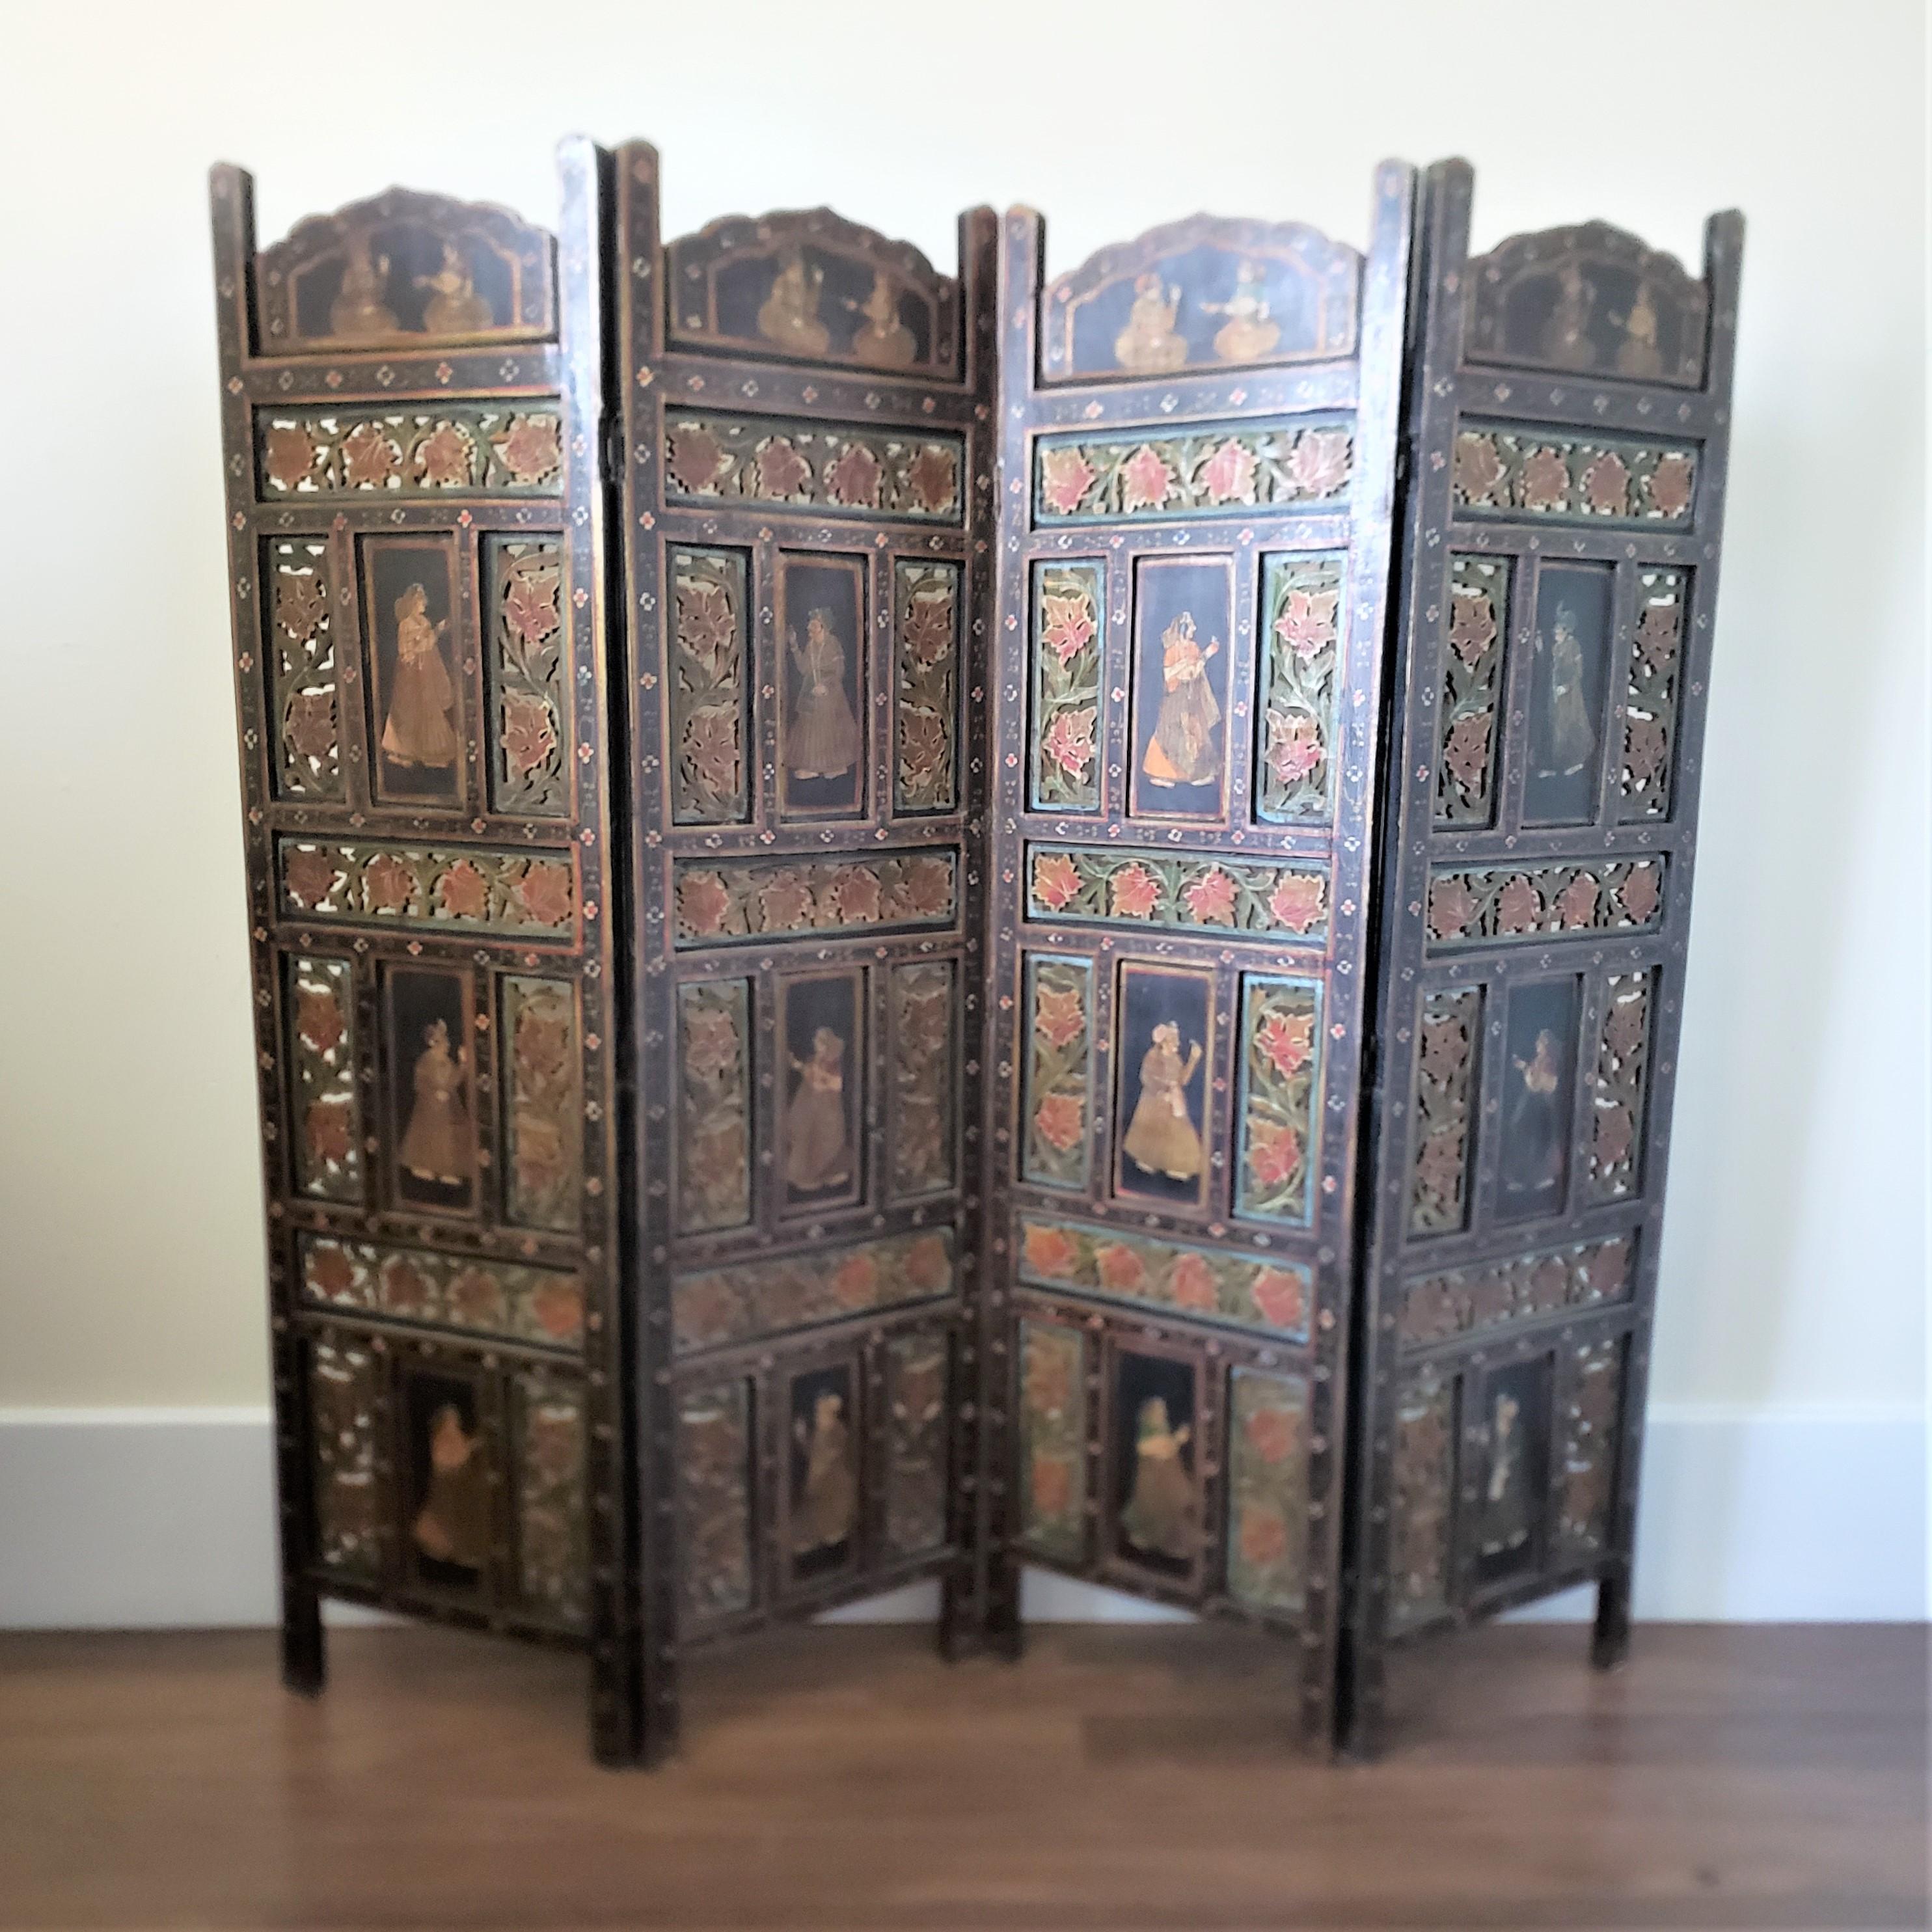 This four hinged panel screen or room divider has no maker's label or signature, but is presumed to have originated from India and date to approximately 1900 and done in the period Anglo-Indian style. The panels are composed of a softwood with inset